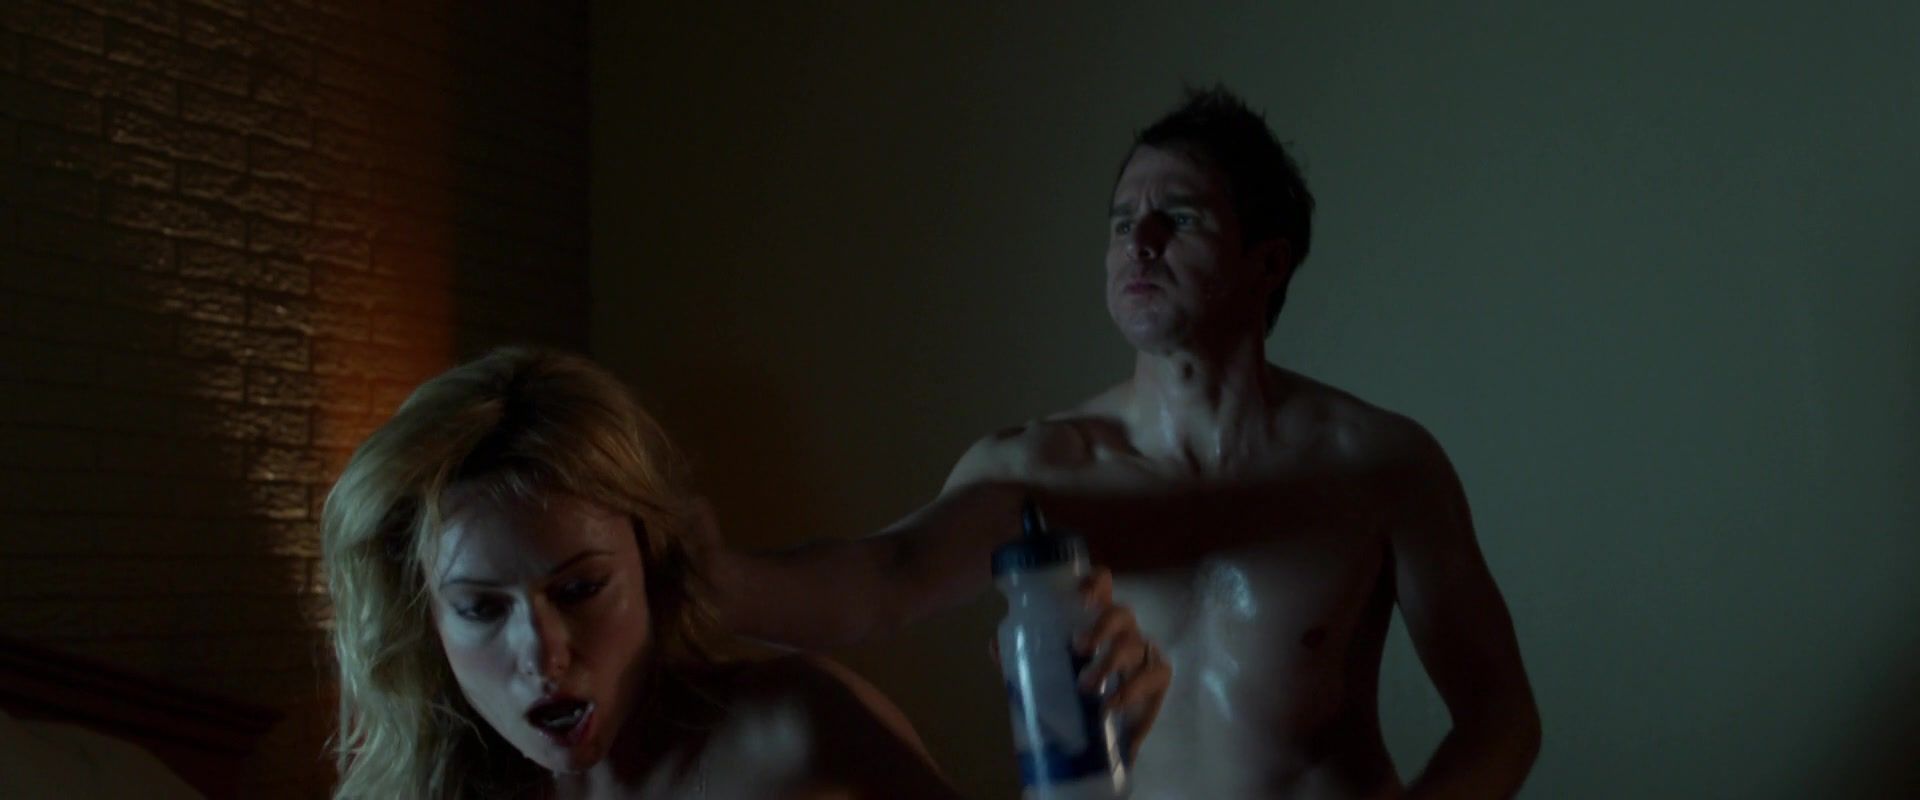 PlanetRomeo Sexy Olivia Wilde, Michelle Monaghan nude - Better Living Through Chemistry (2014) Jap - 2